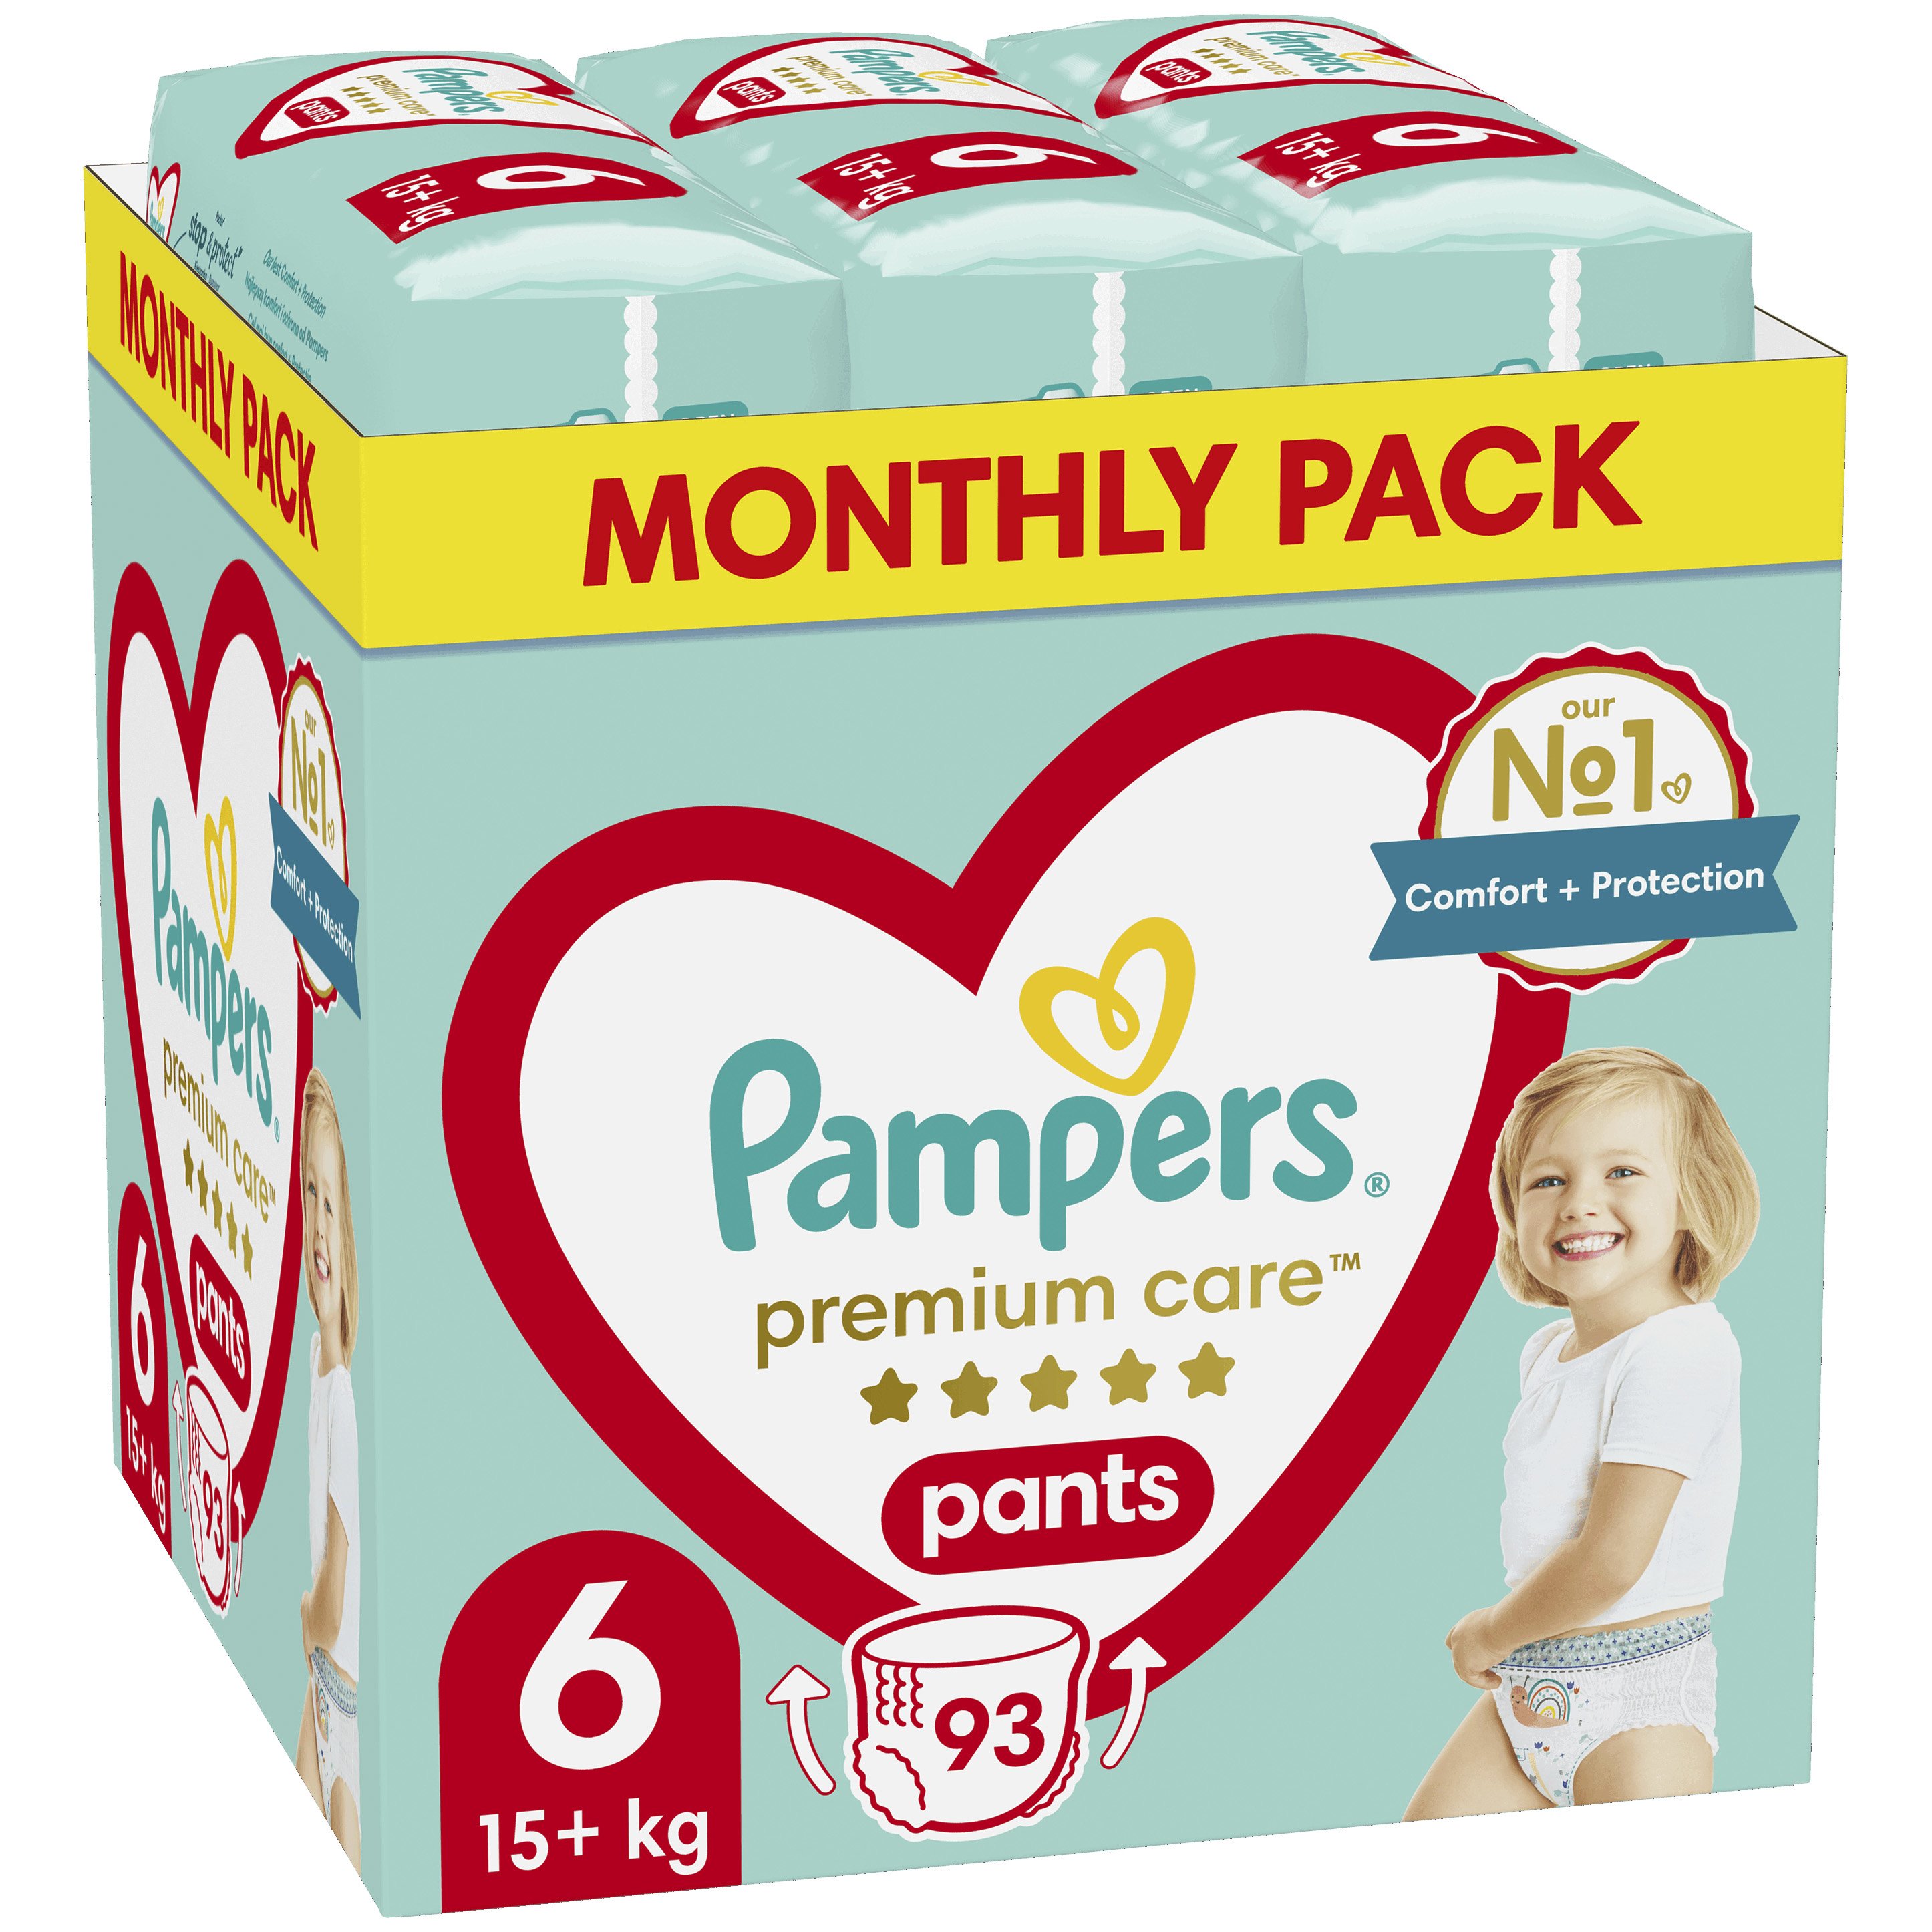 Pampers Premium Care Pants Monthly Pack No6 (15+kg) 93 πάνες 46700